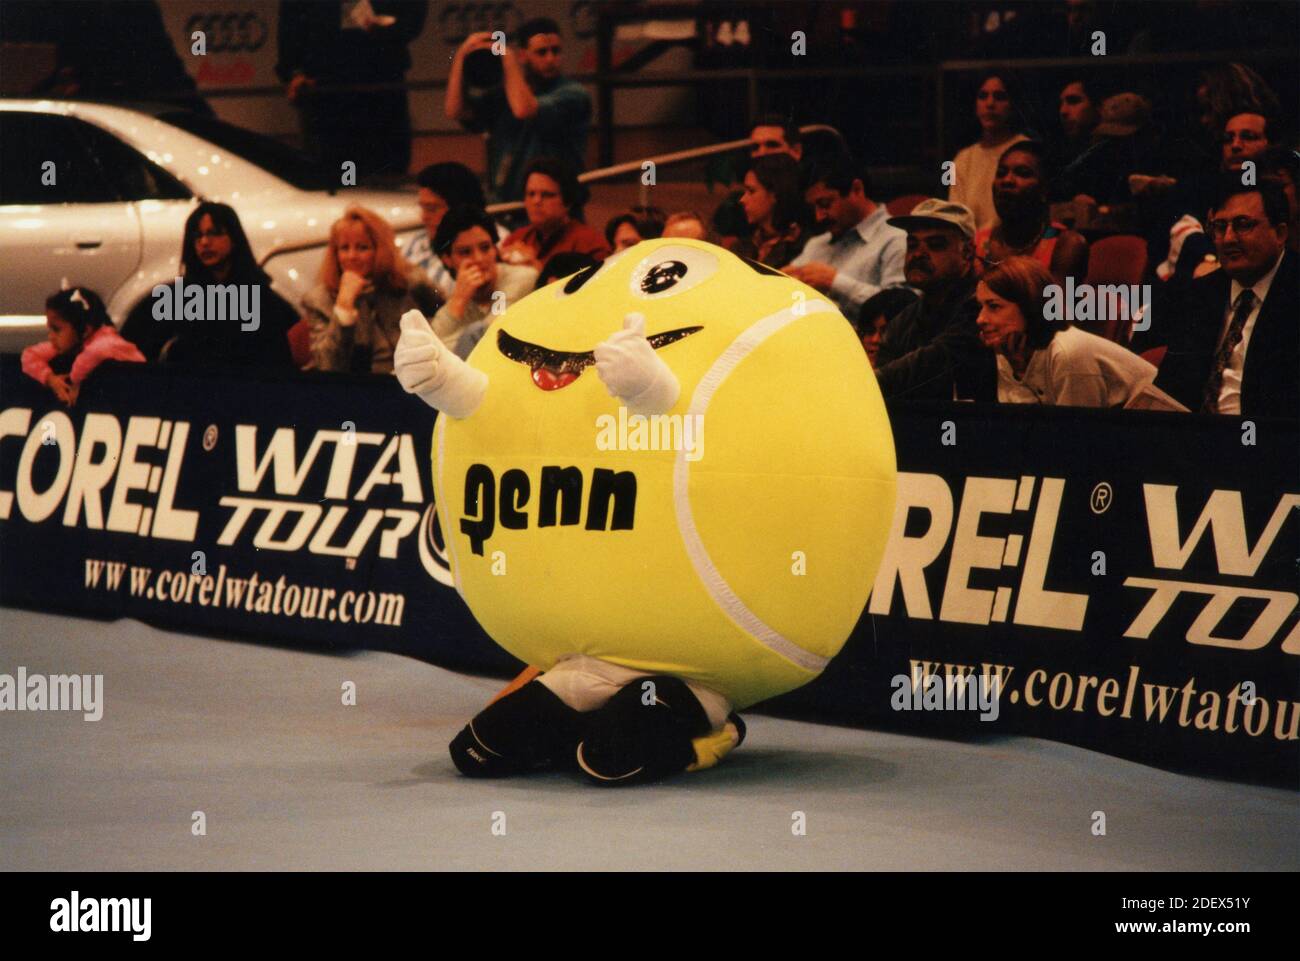 Tennis ball advertisement at the Chase Chaps tournament, 1998 Stock Photo